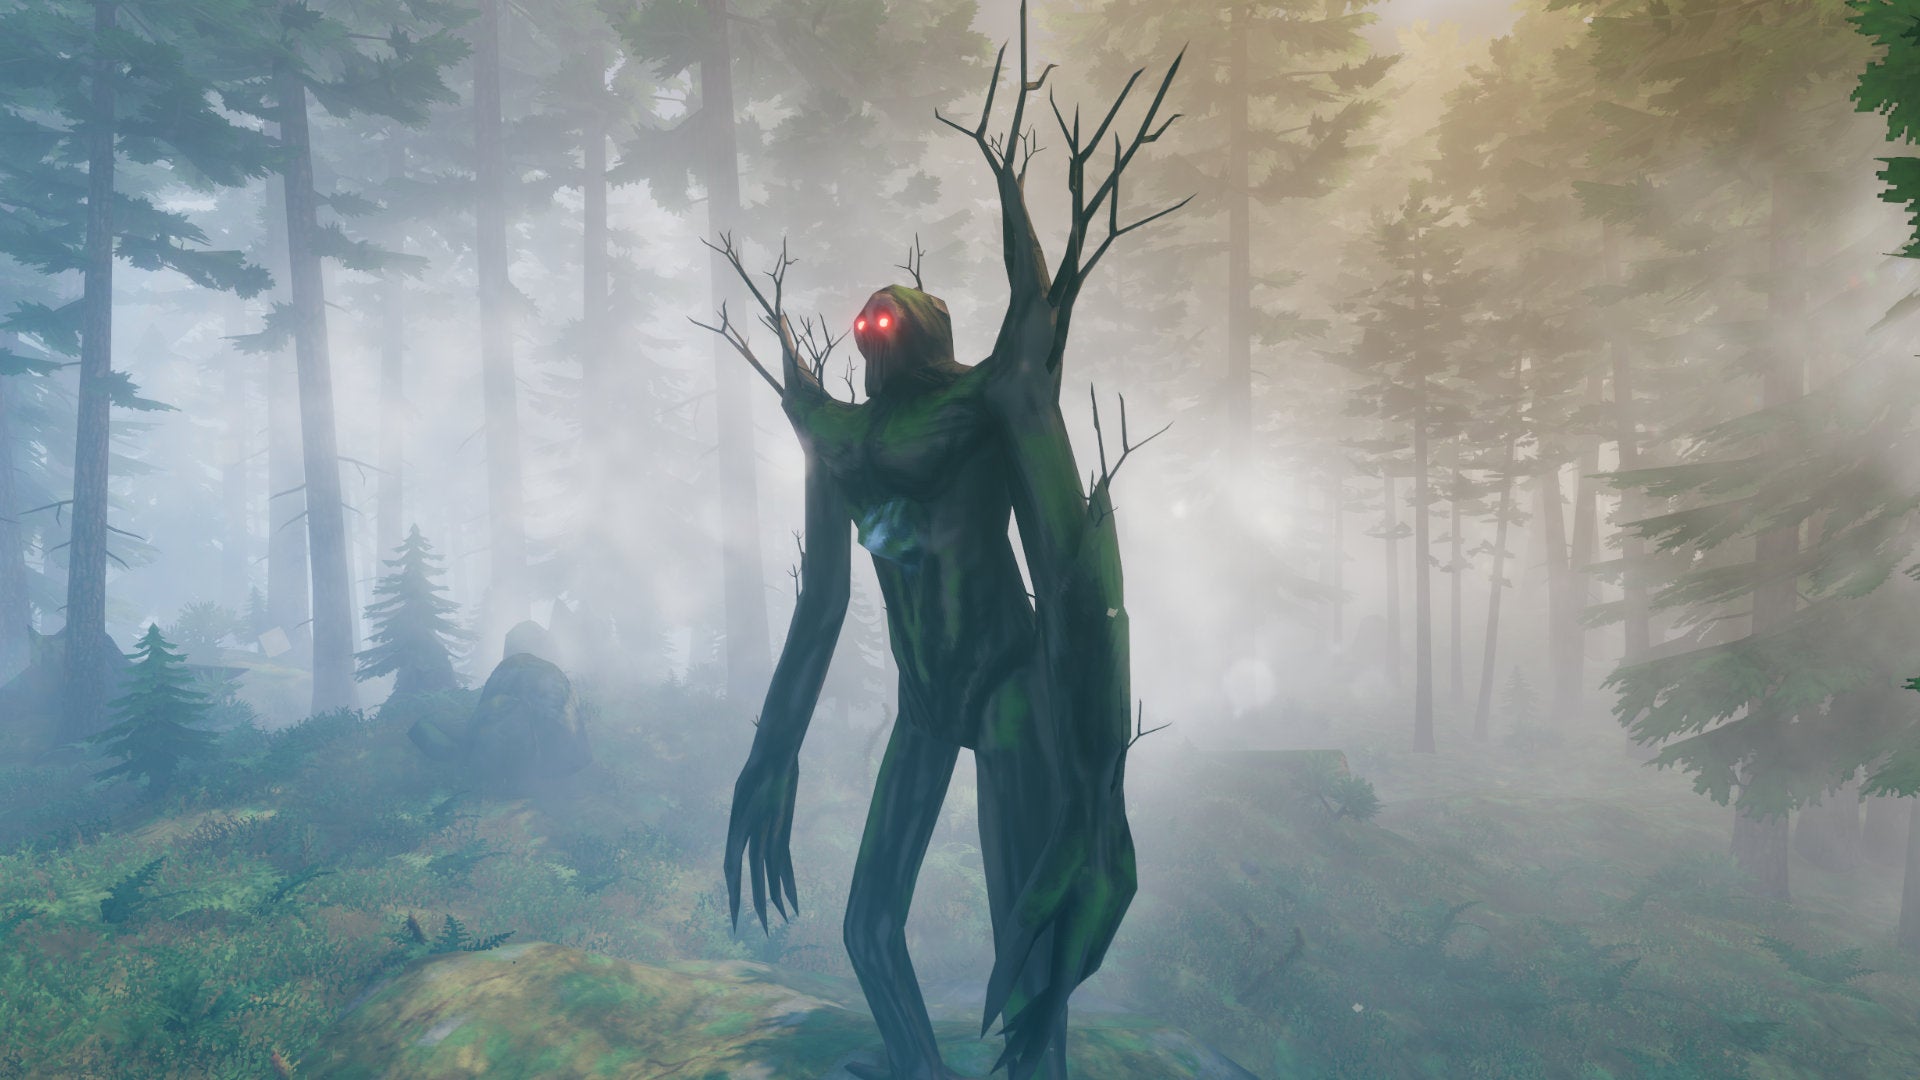 A Valheim screenshot of The Elder, the second boss, standing and looking off-screen, with a Black Forest in the background.